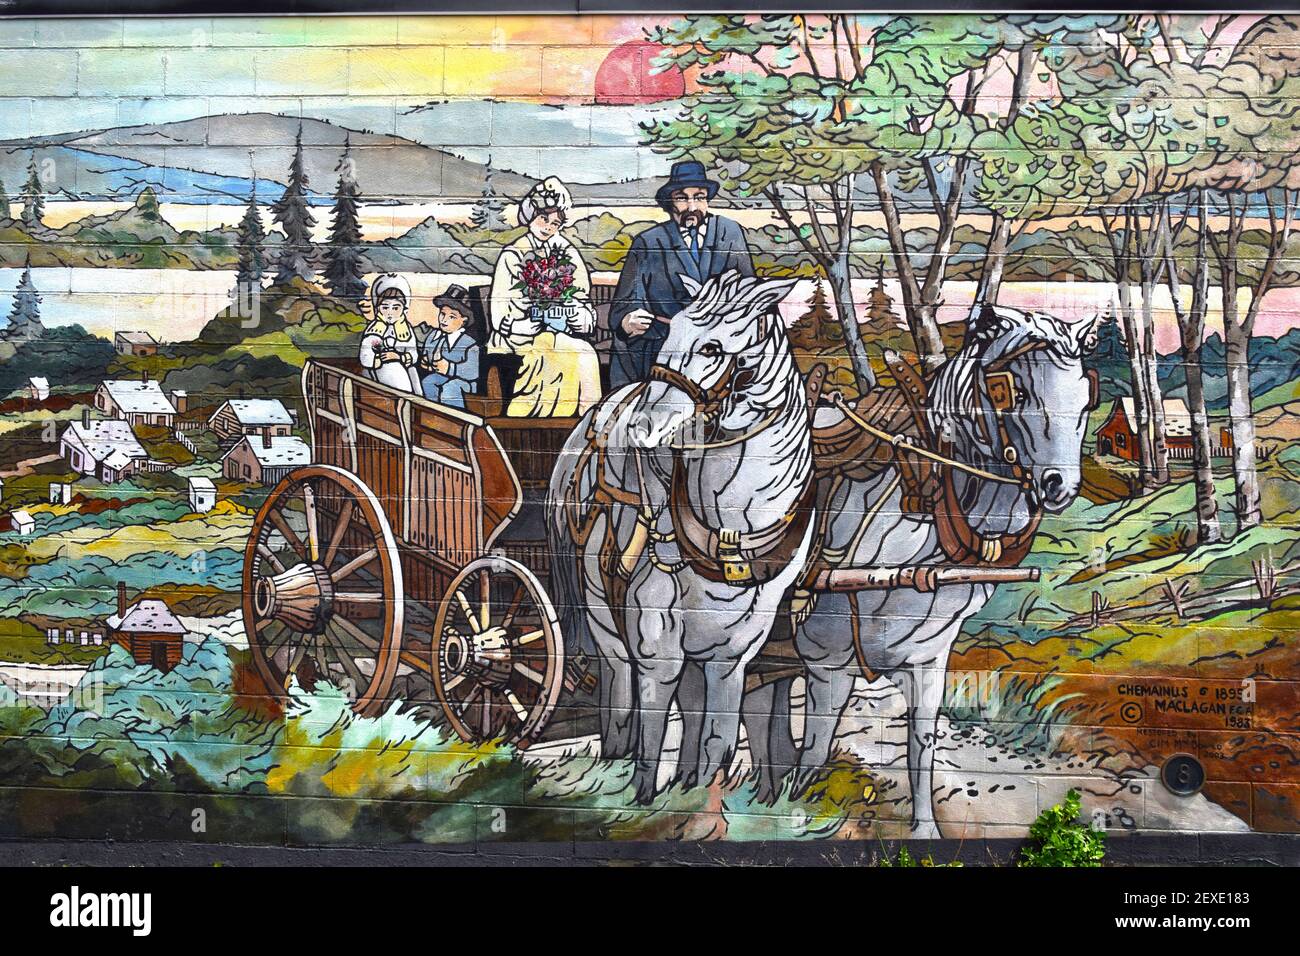 CHEMAINUS, CANADA - MAY 16, 2017: The mural 'Chemainus 1891', painted 1983 by David Maclagan, is one of more than 40 murals at the town Chemainus Stock Photo